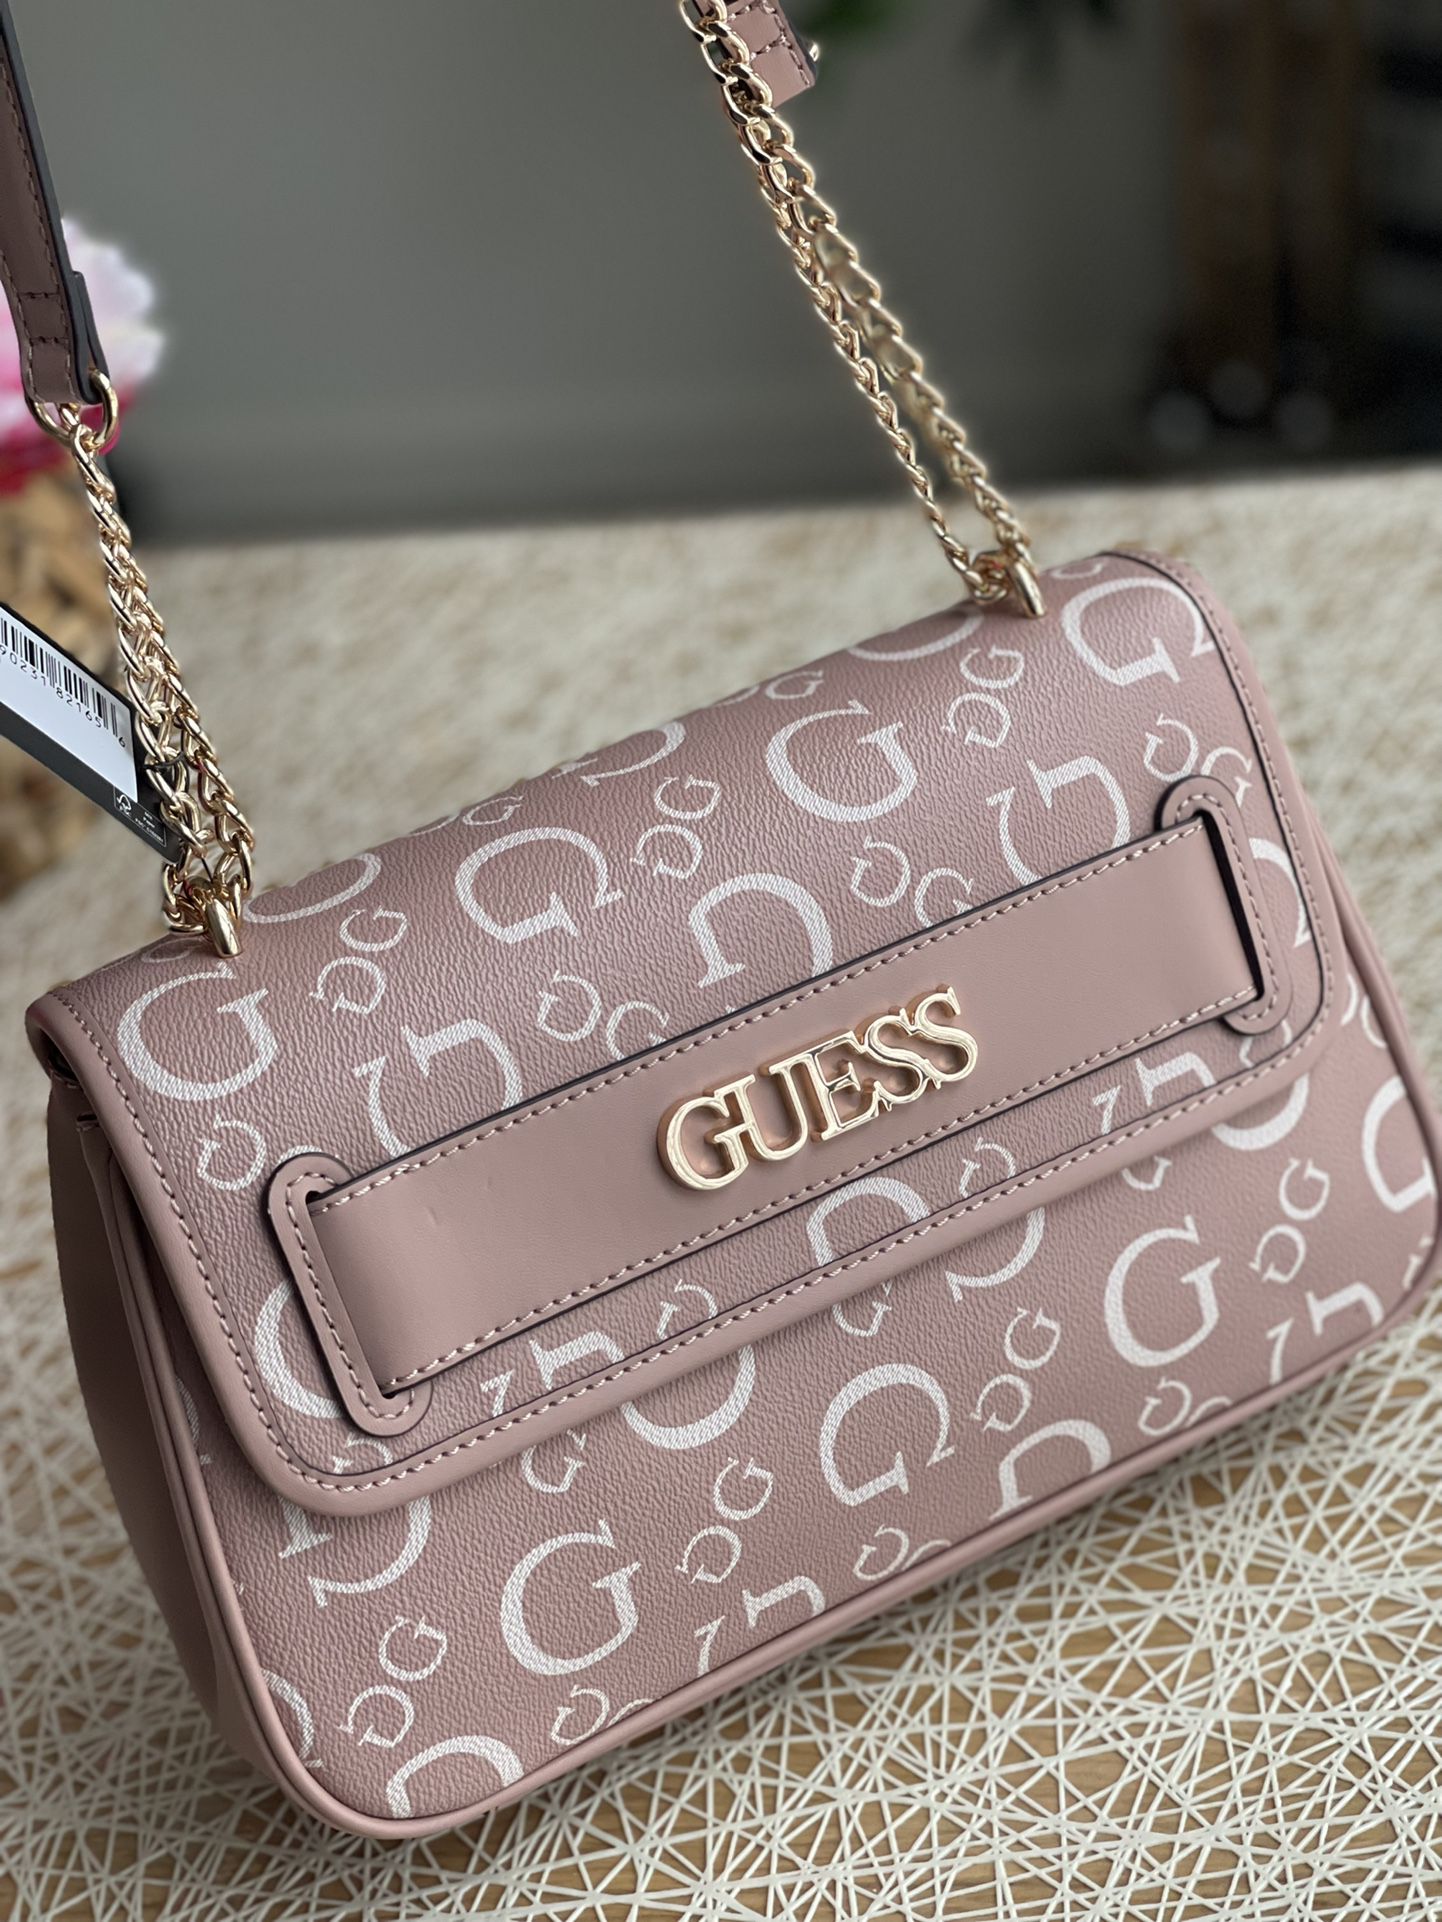 Guess Blush Satchel Big Gold Guess Letter,partly  Gold Chain Strap Women Bag NWT